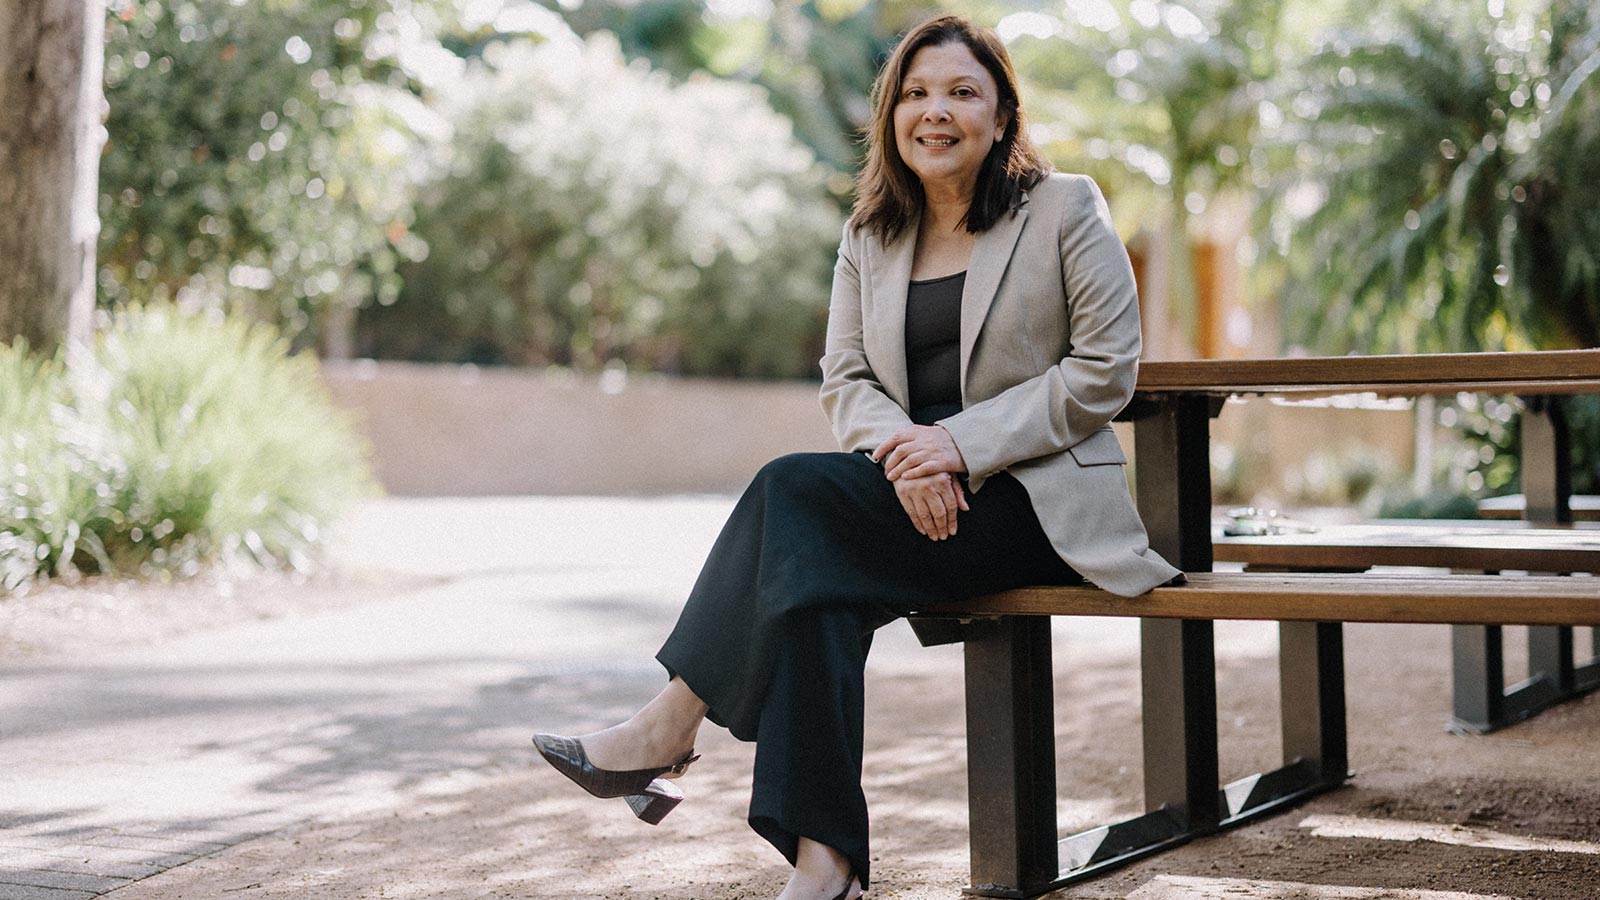 Professor Millicent Chang is wearing a black top, pants and shoes with a light grey dress jacket. She is sitting on a bench on UOW with her legs crossed, smiling.